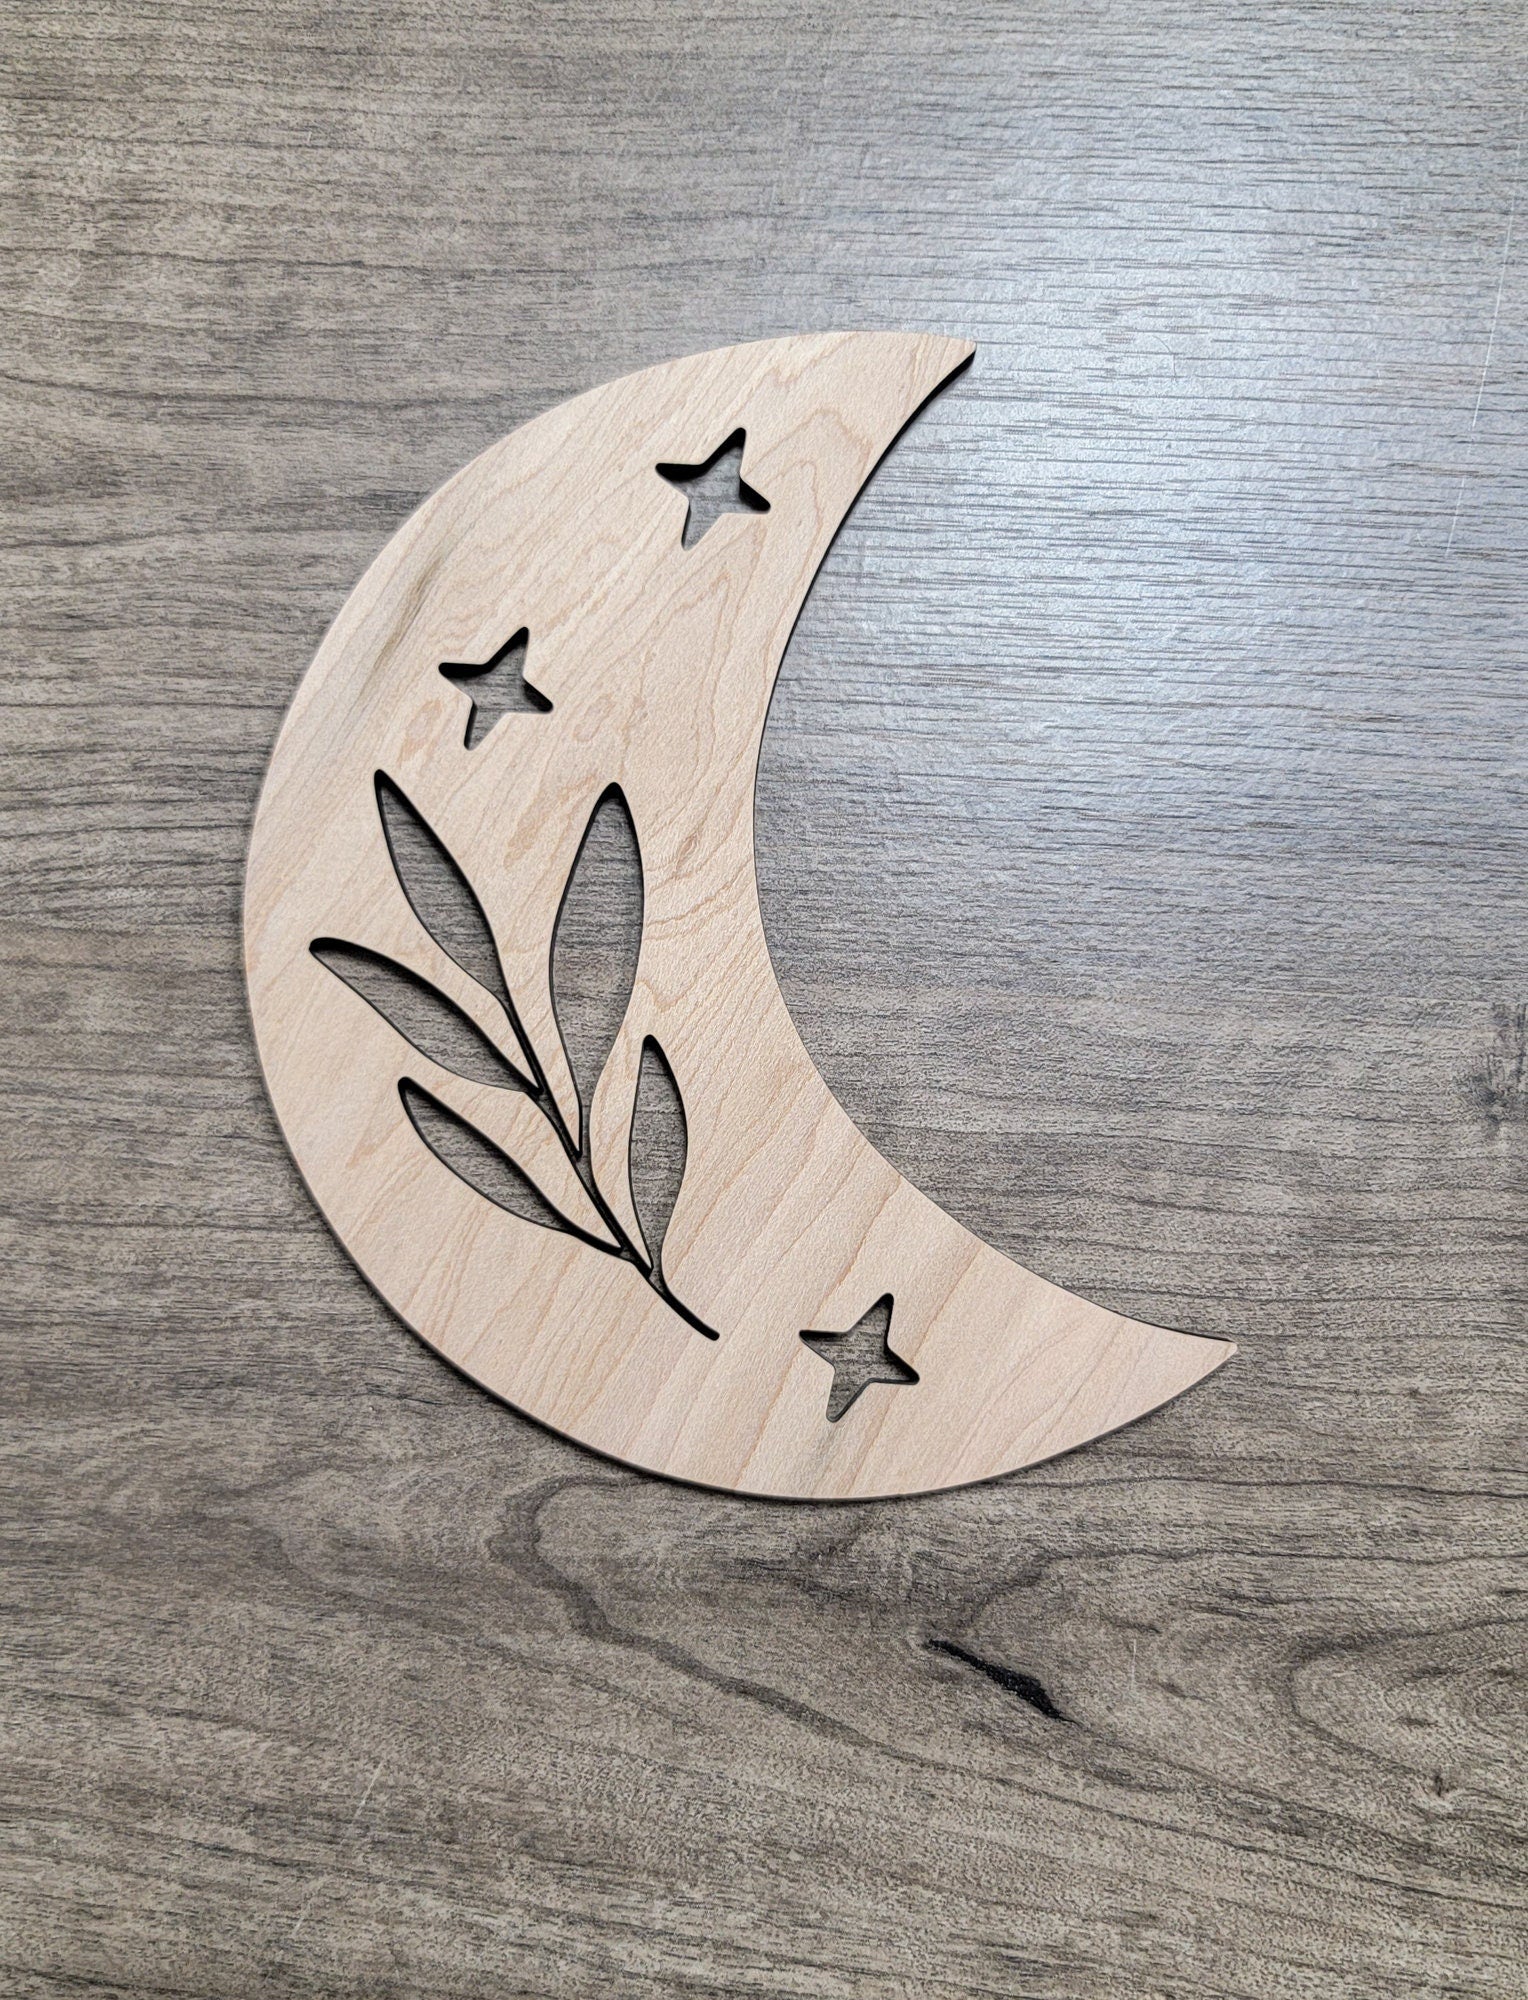 Crescent Moon + Leaf Wood Shape Sign, Wooden Moon Shape Blank, Unfinished Cut out, Crafts DIY for Sign Making, Boho Decor theme Natural 005